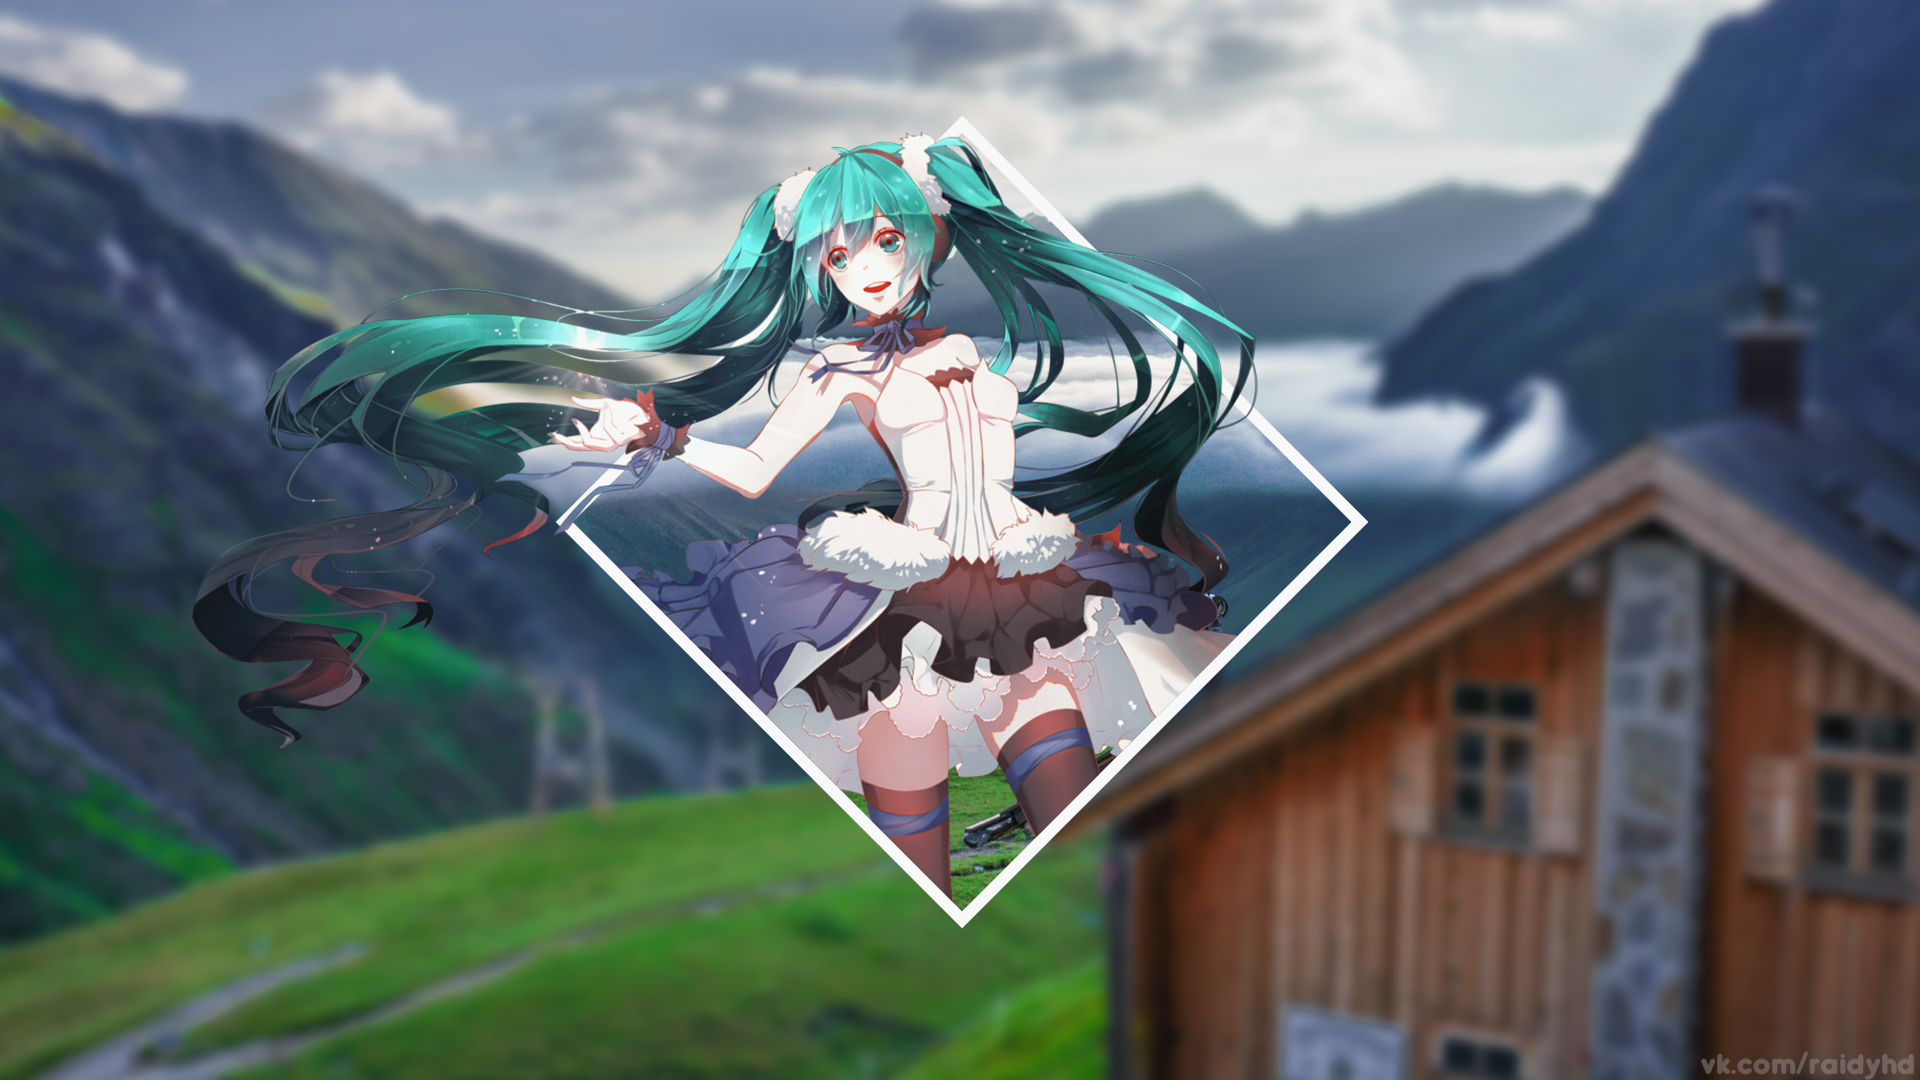 Anime 1920x1080 anime anime girls Hatsune Miku Vocaloid picture-in-picture